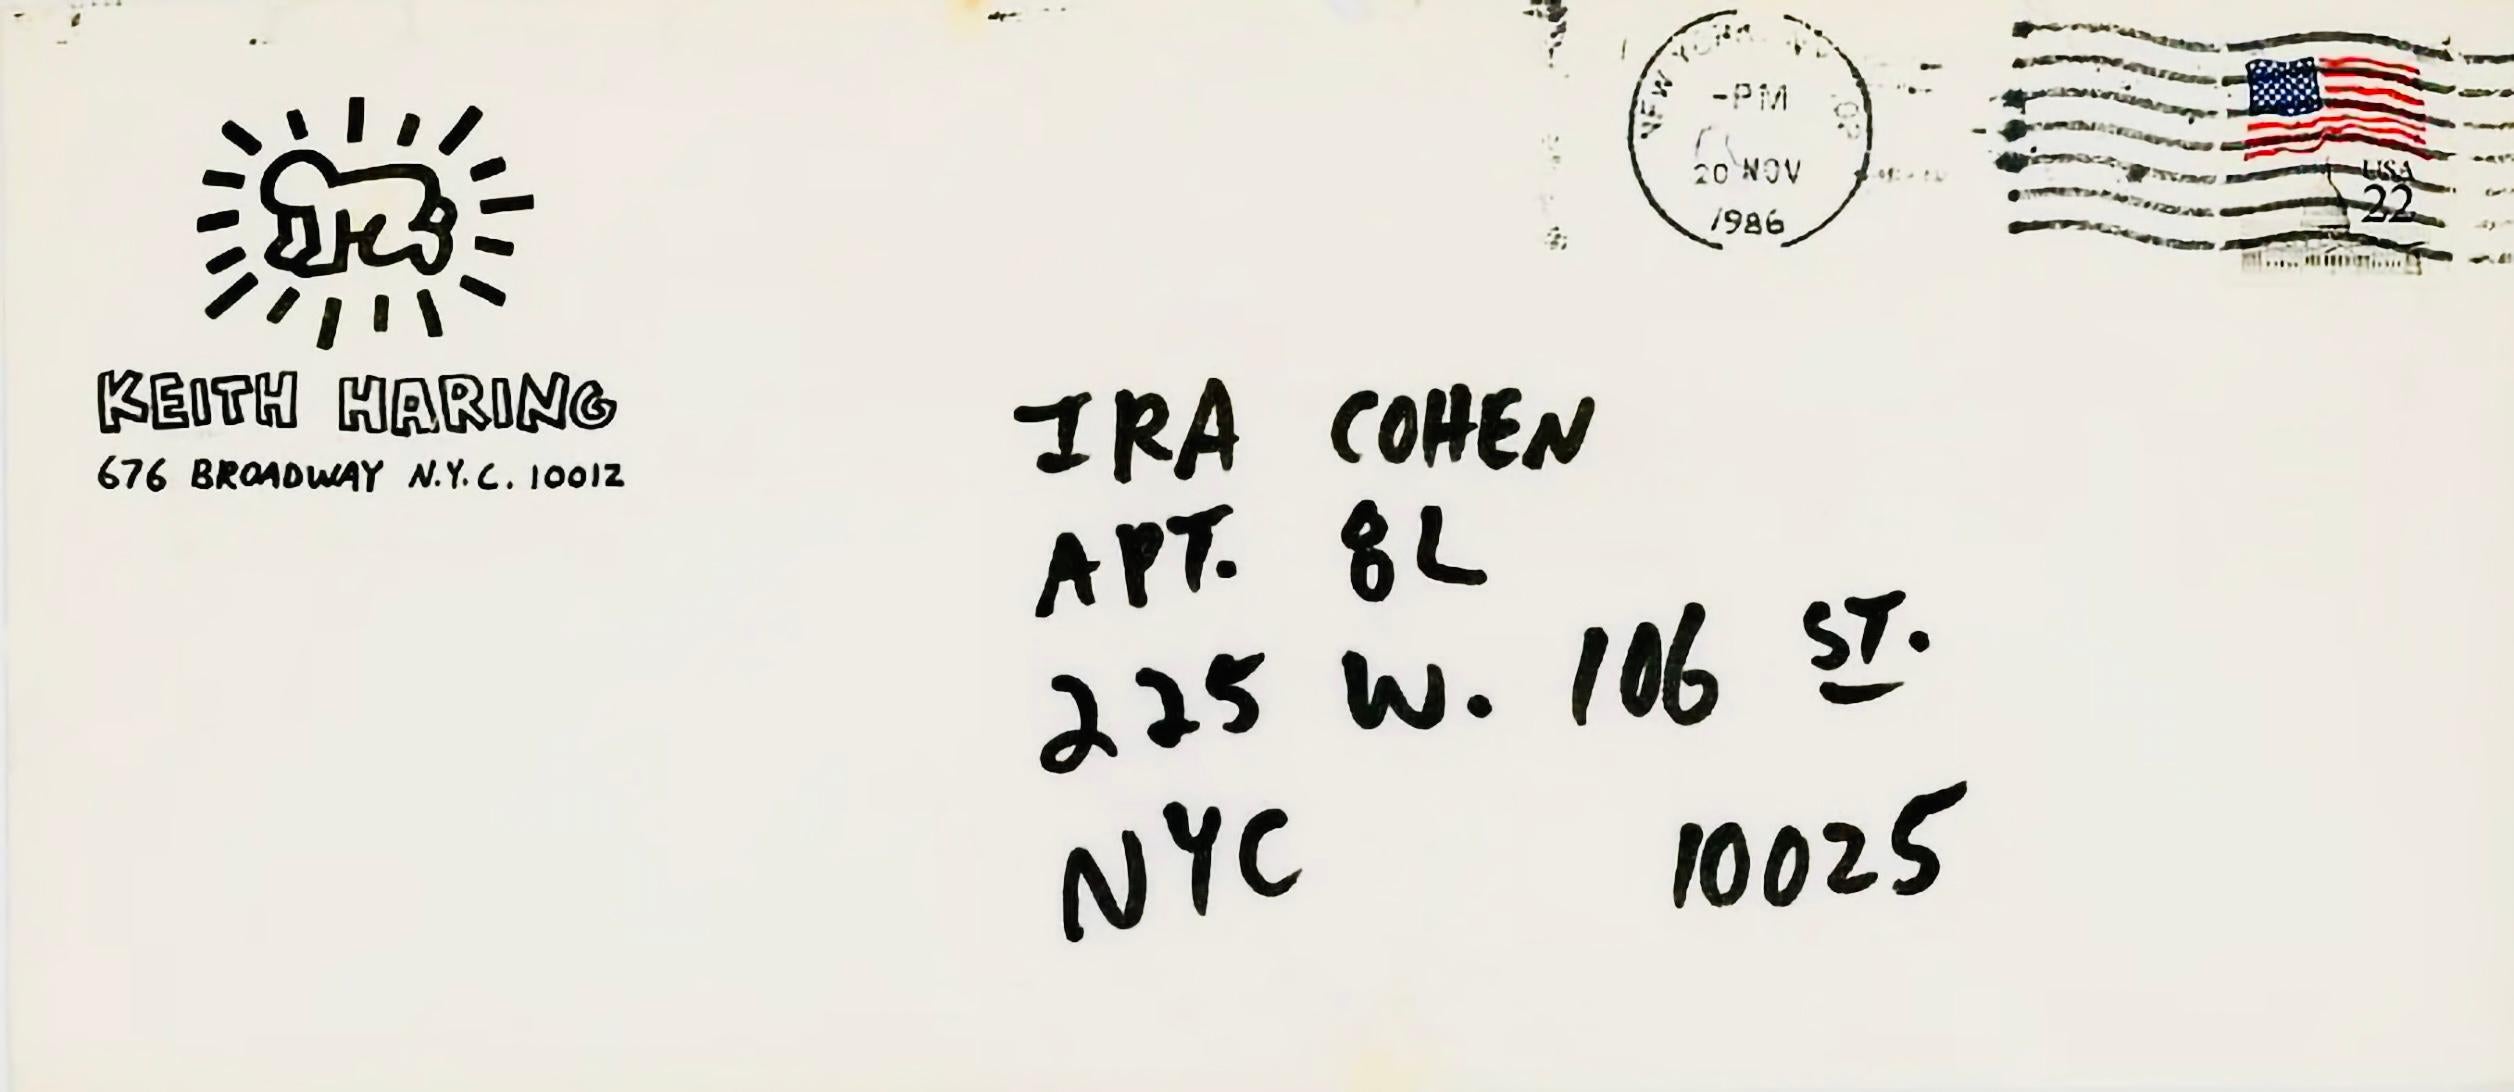 Keith Haring Handwritten letter 1986 (Keith Haring letter)  For Sale 3